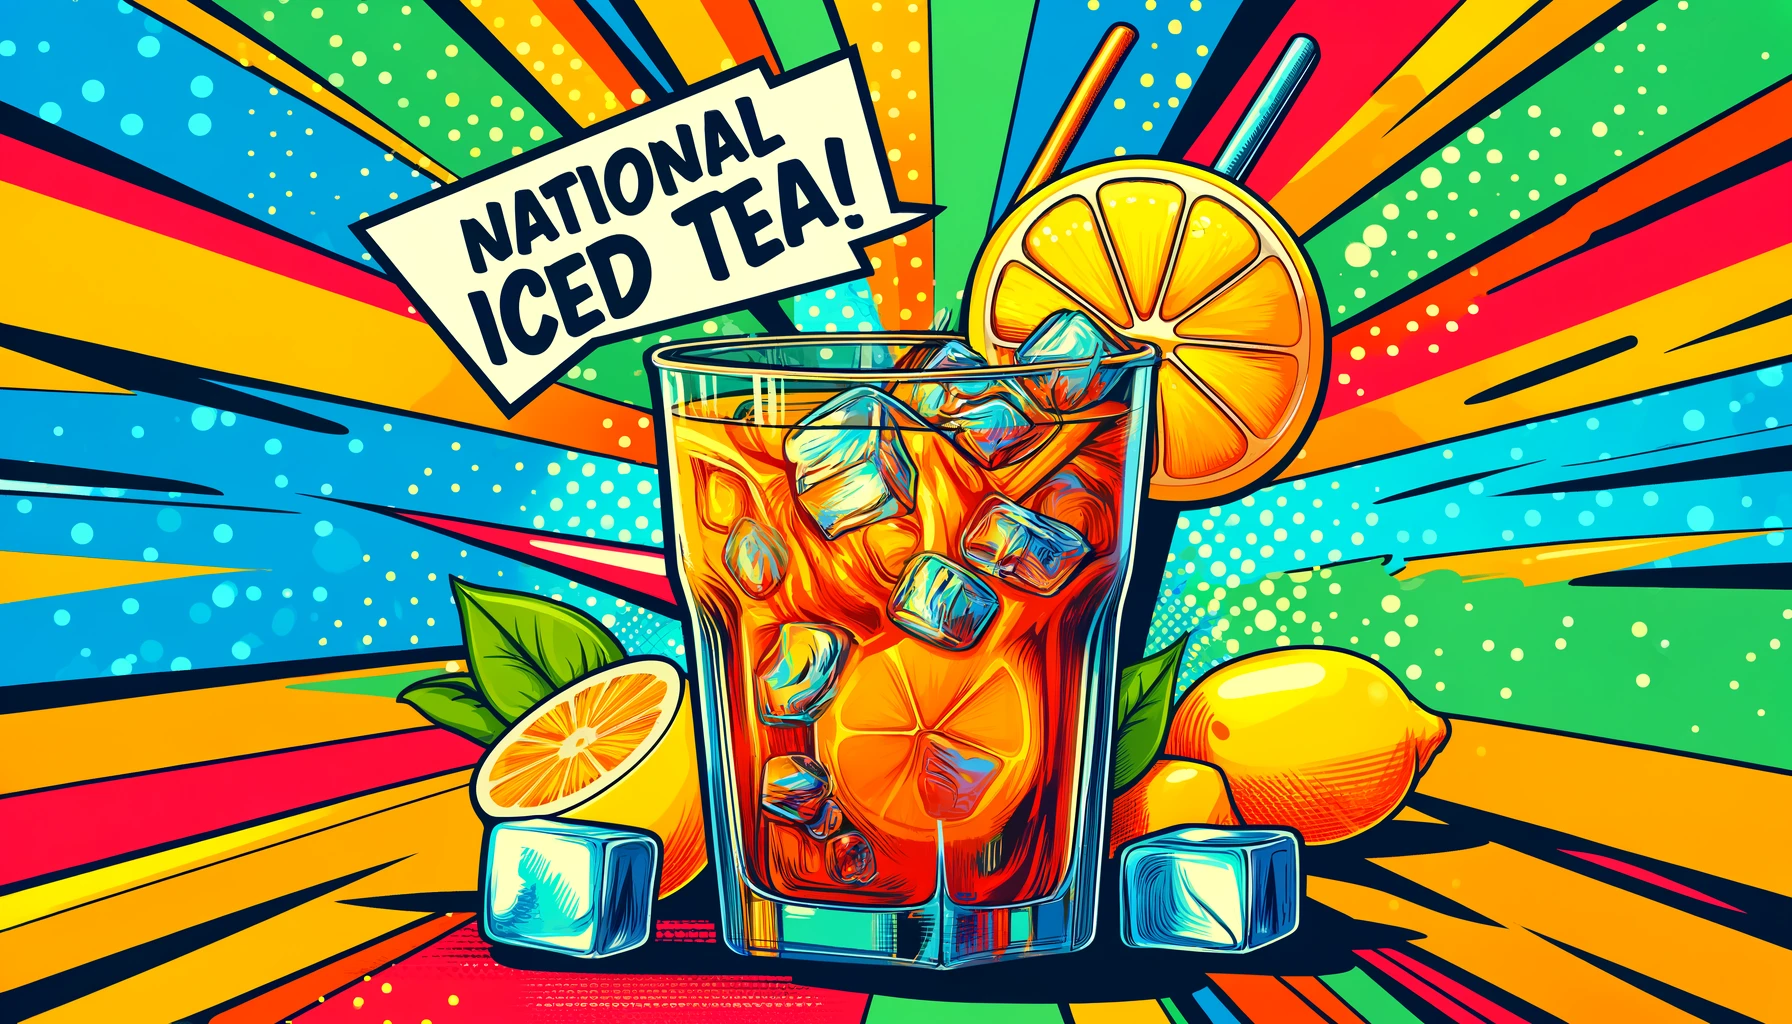 National Iced Tea Day Cheers: Share the Refreshment